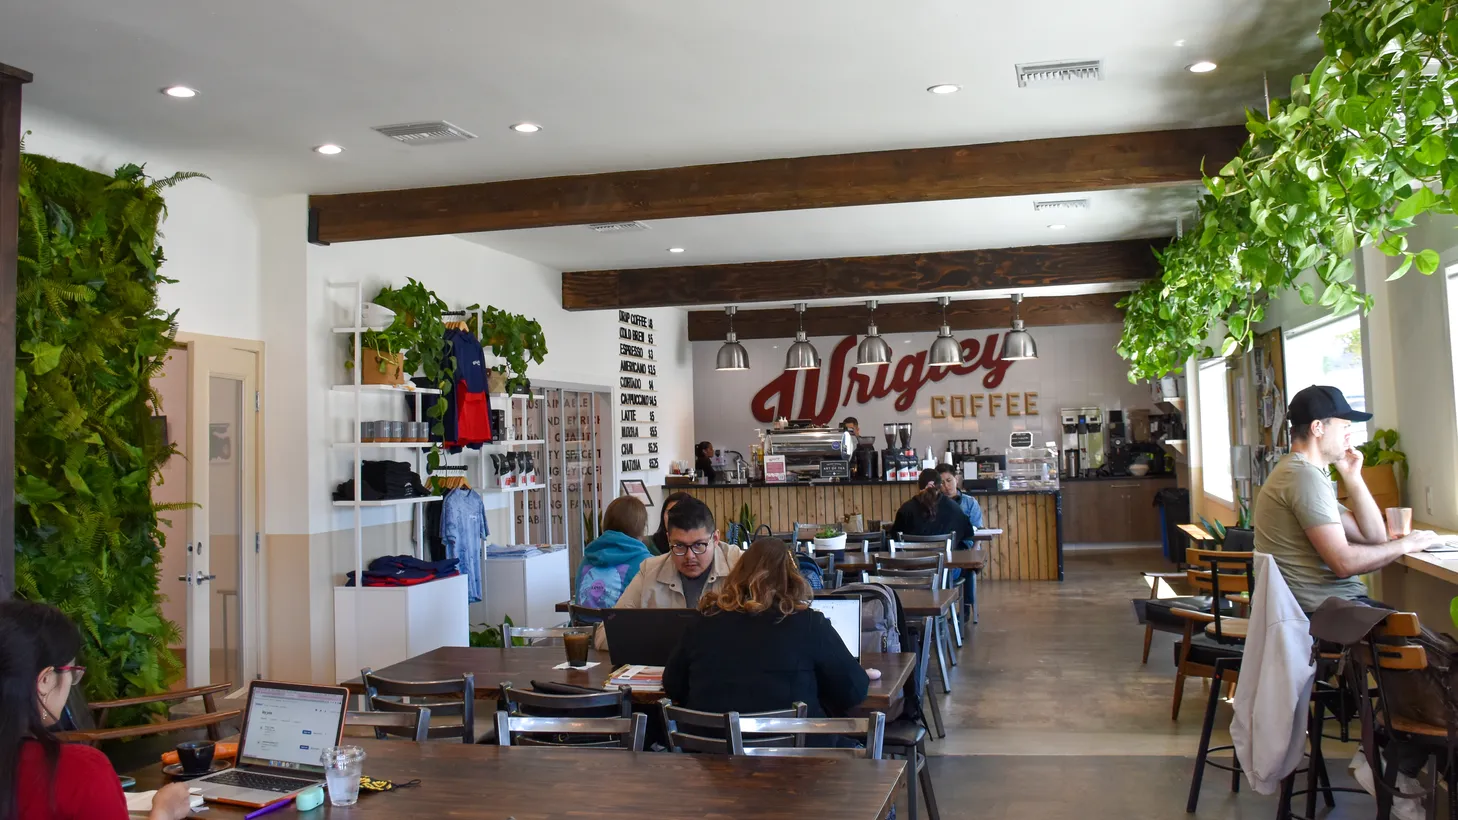 Customers chat, work and sip coffee at Wrigley Coffee in Long Beach, which recently opened as part of a program to help train people who face housing insecurity.